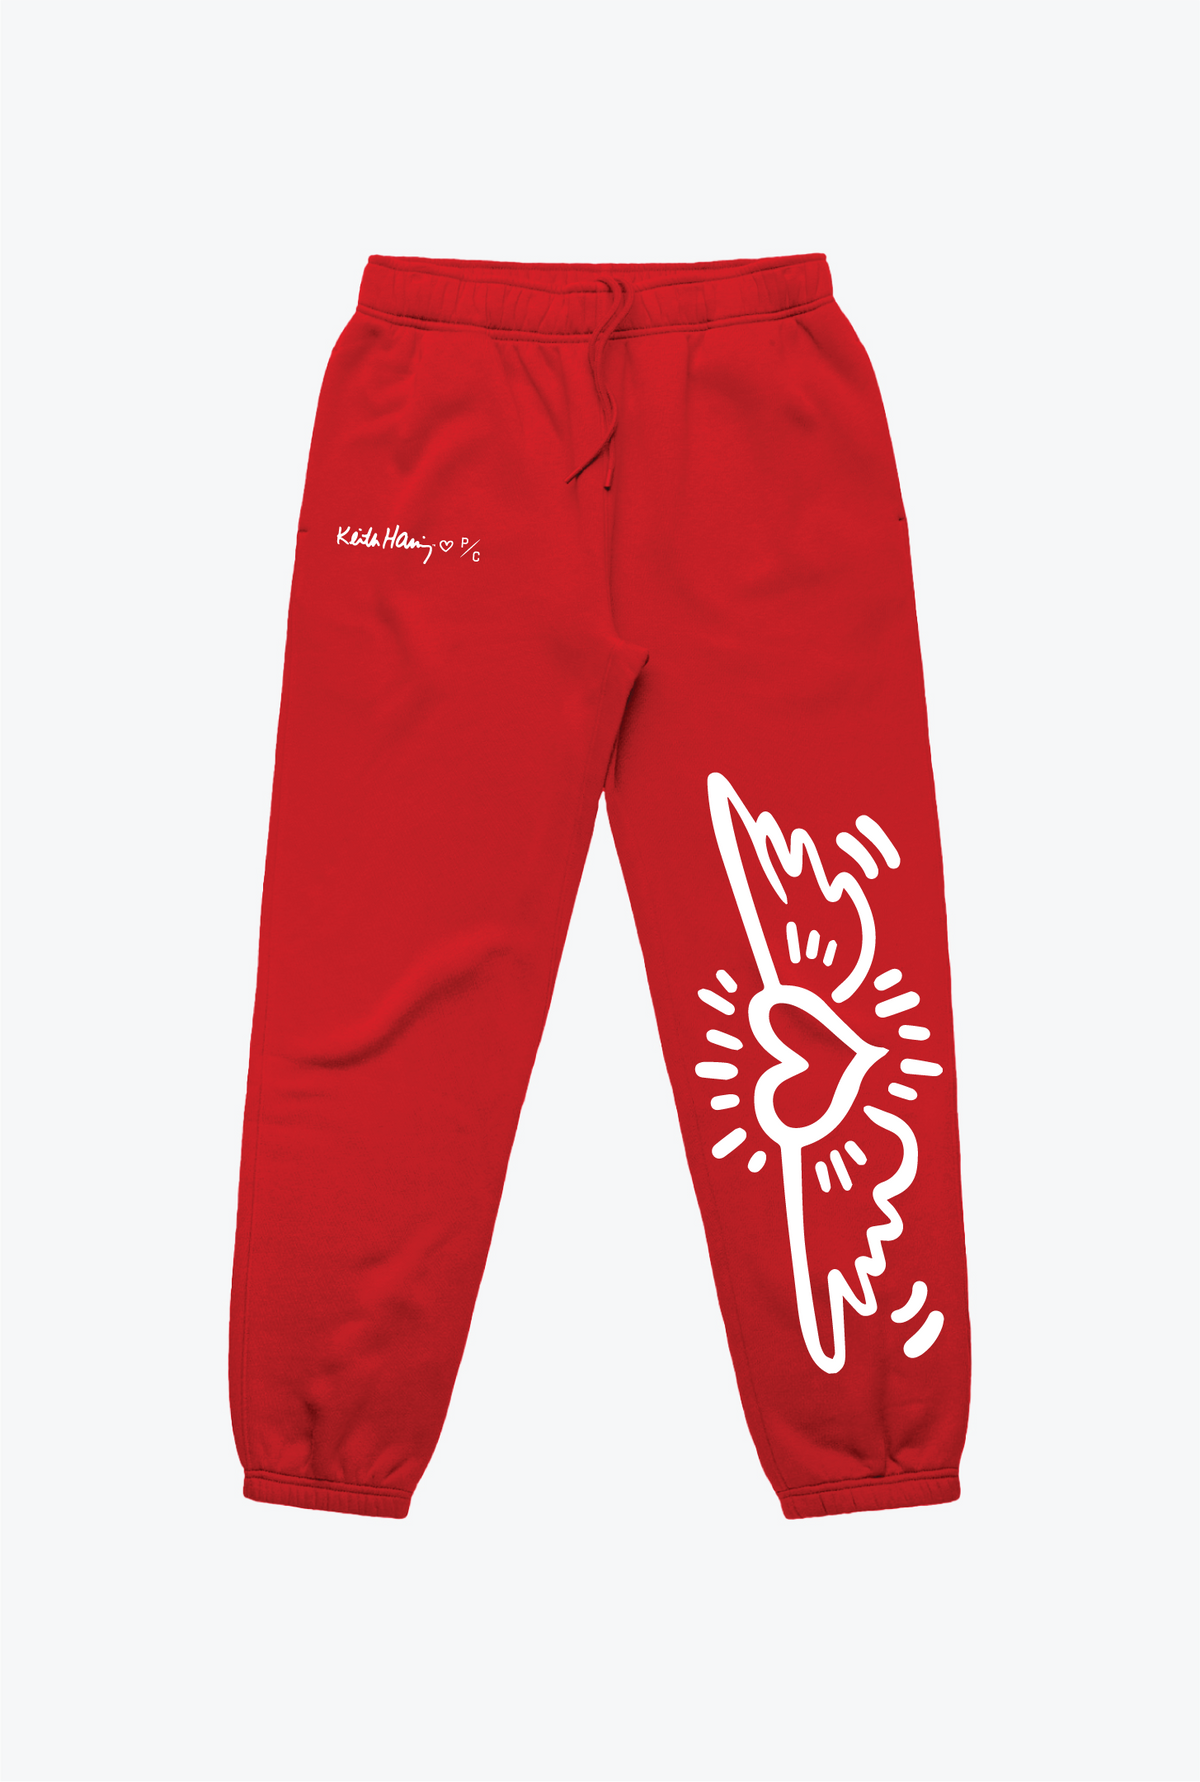 P/C x Keith Haring  - Red